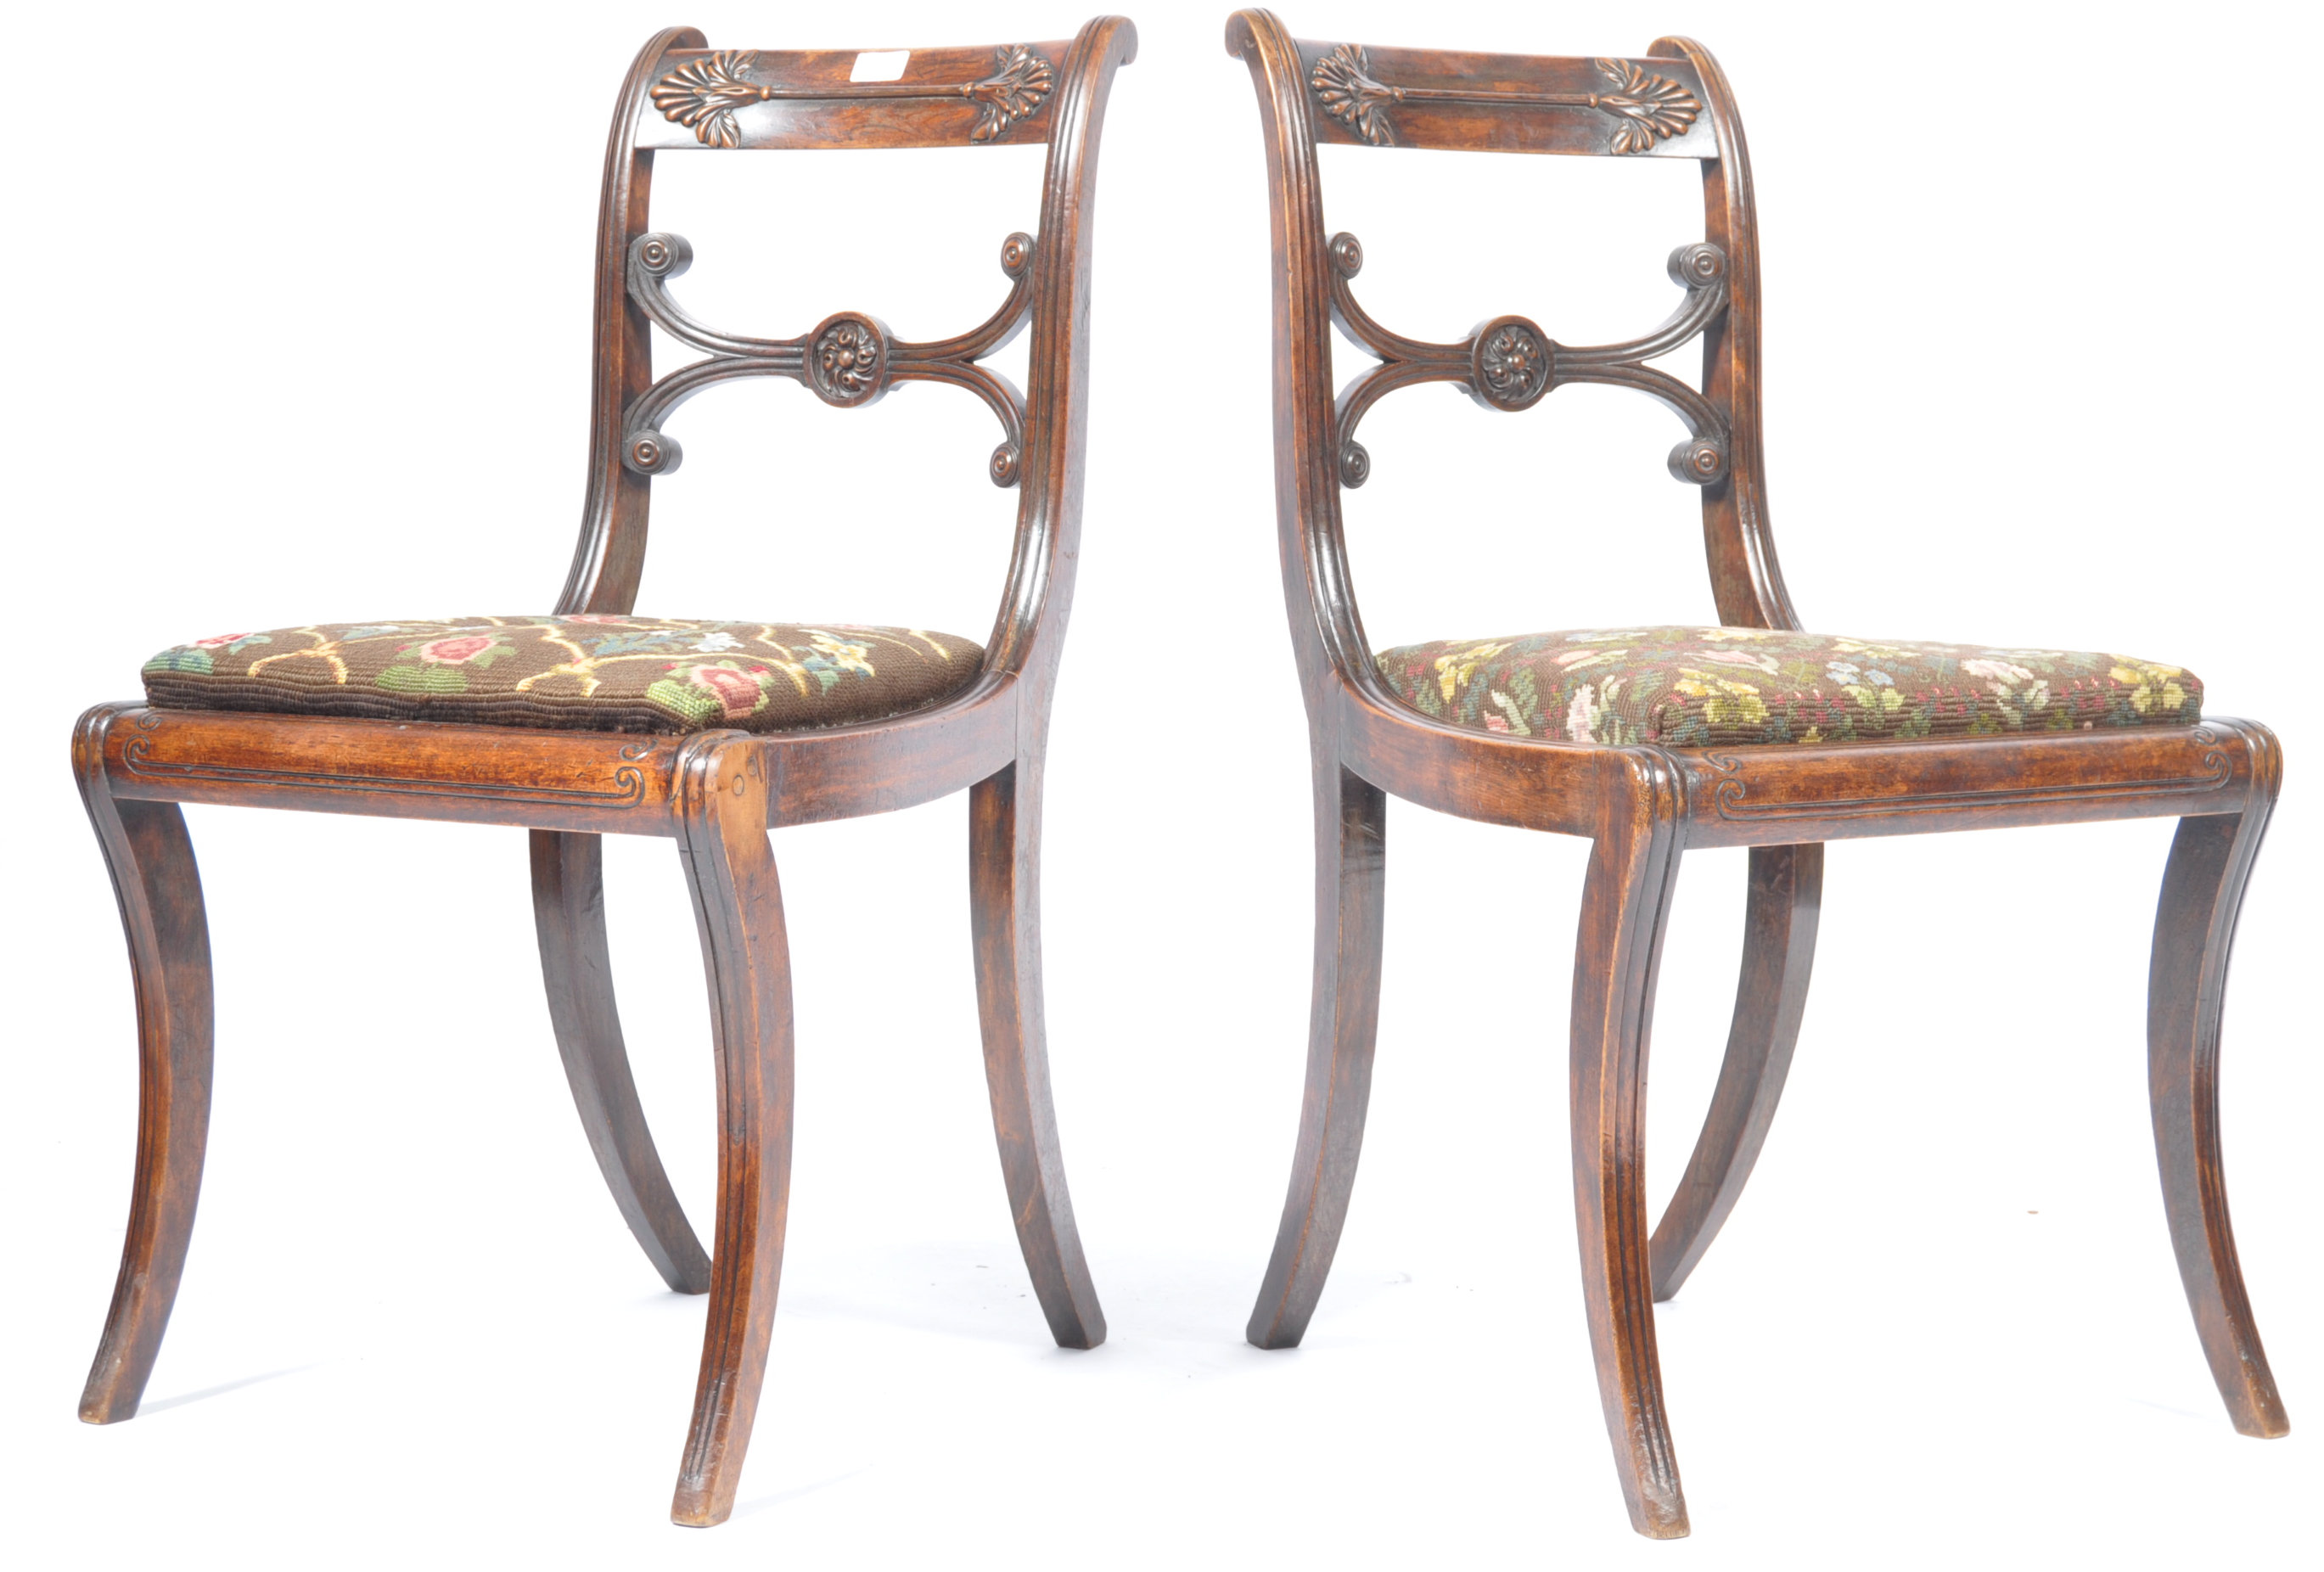 PAIR OF GILLOWS MANNER REGENCY SIDE CHAIRS